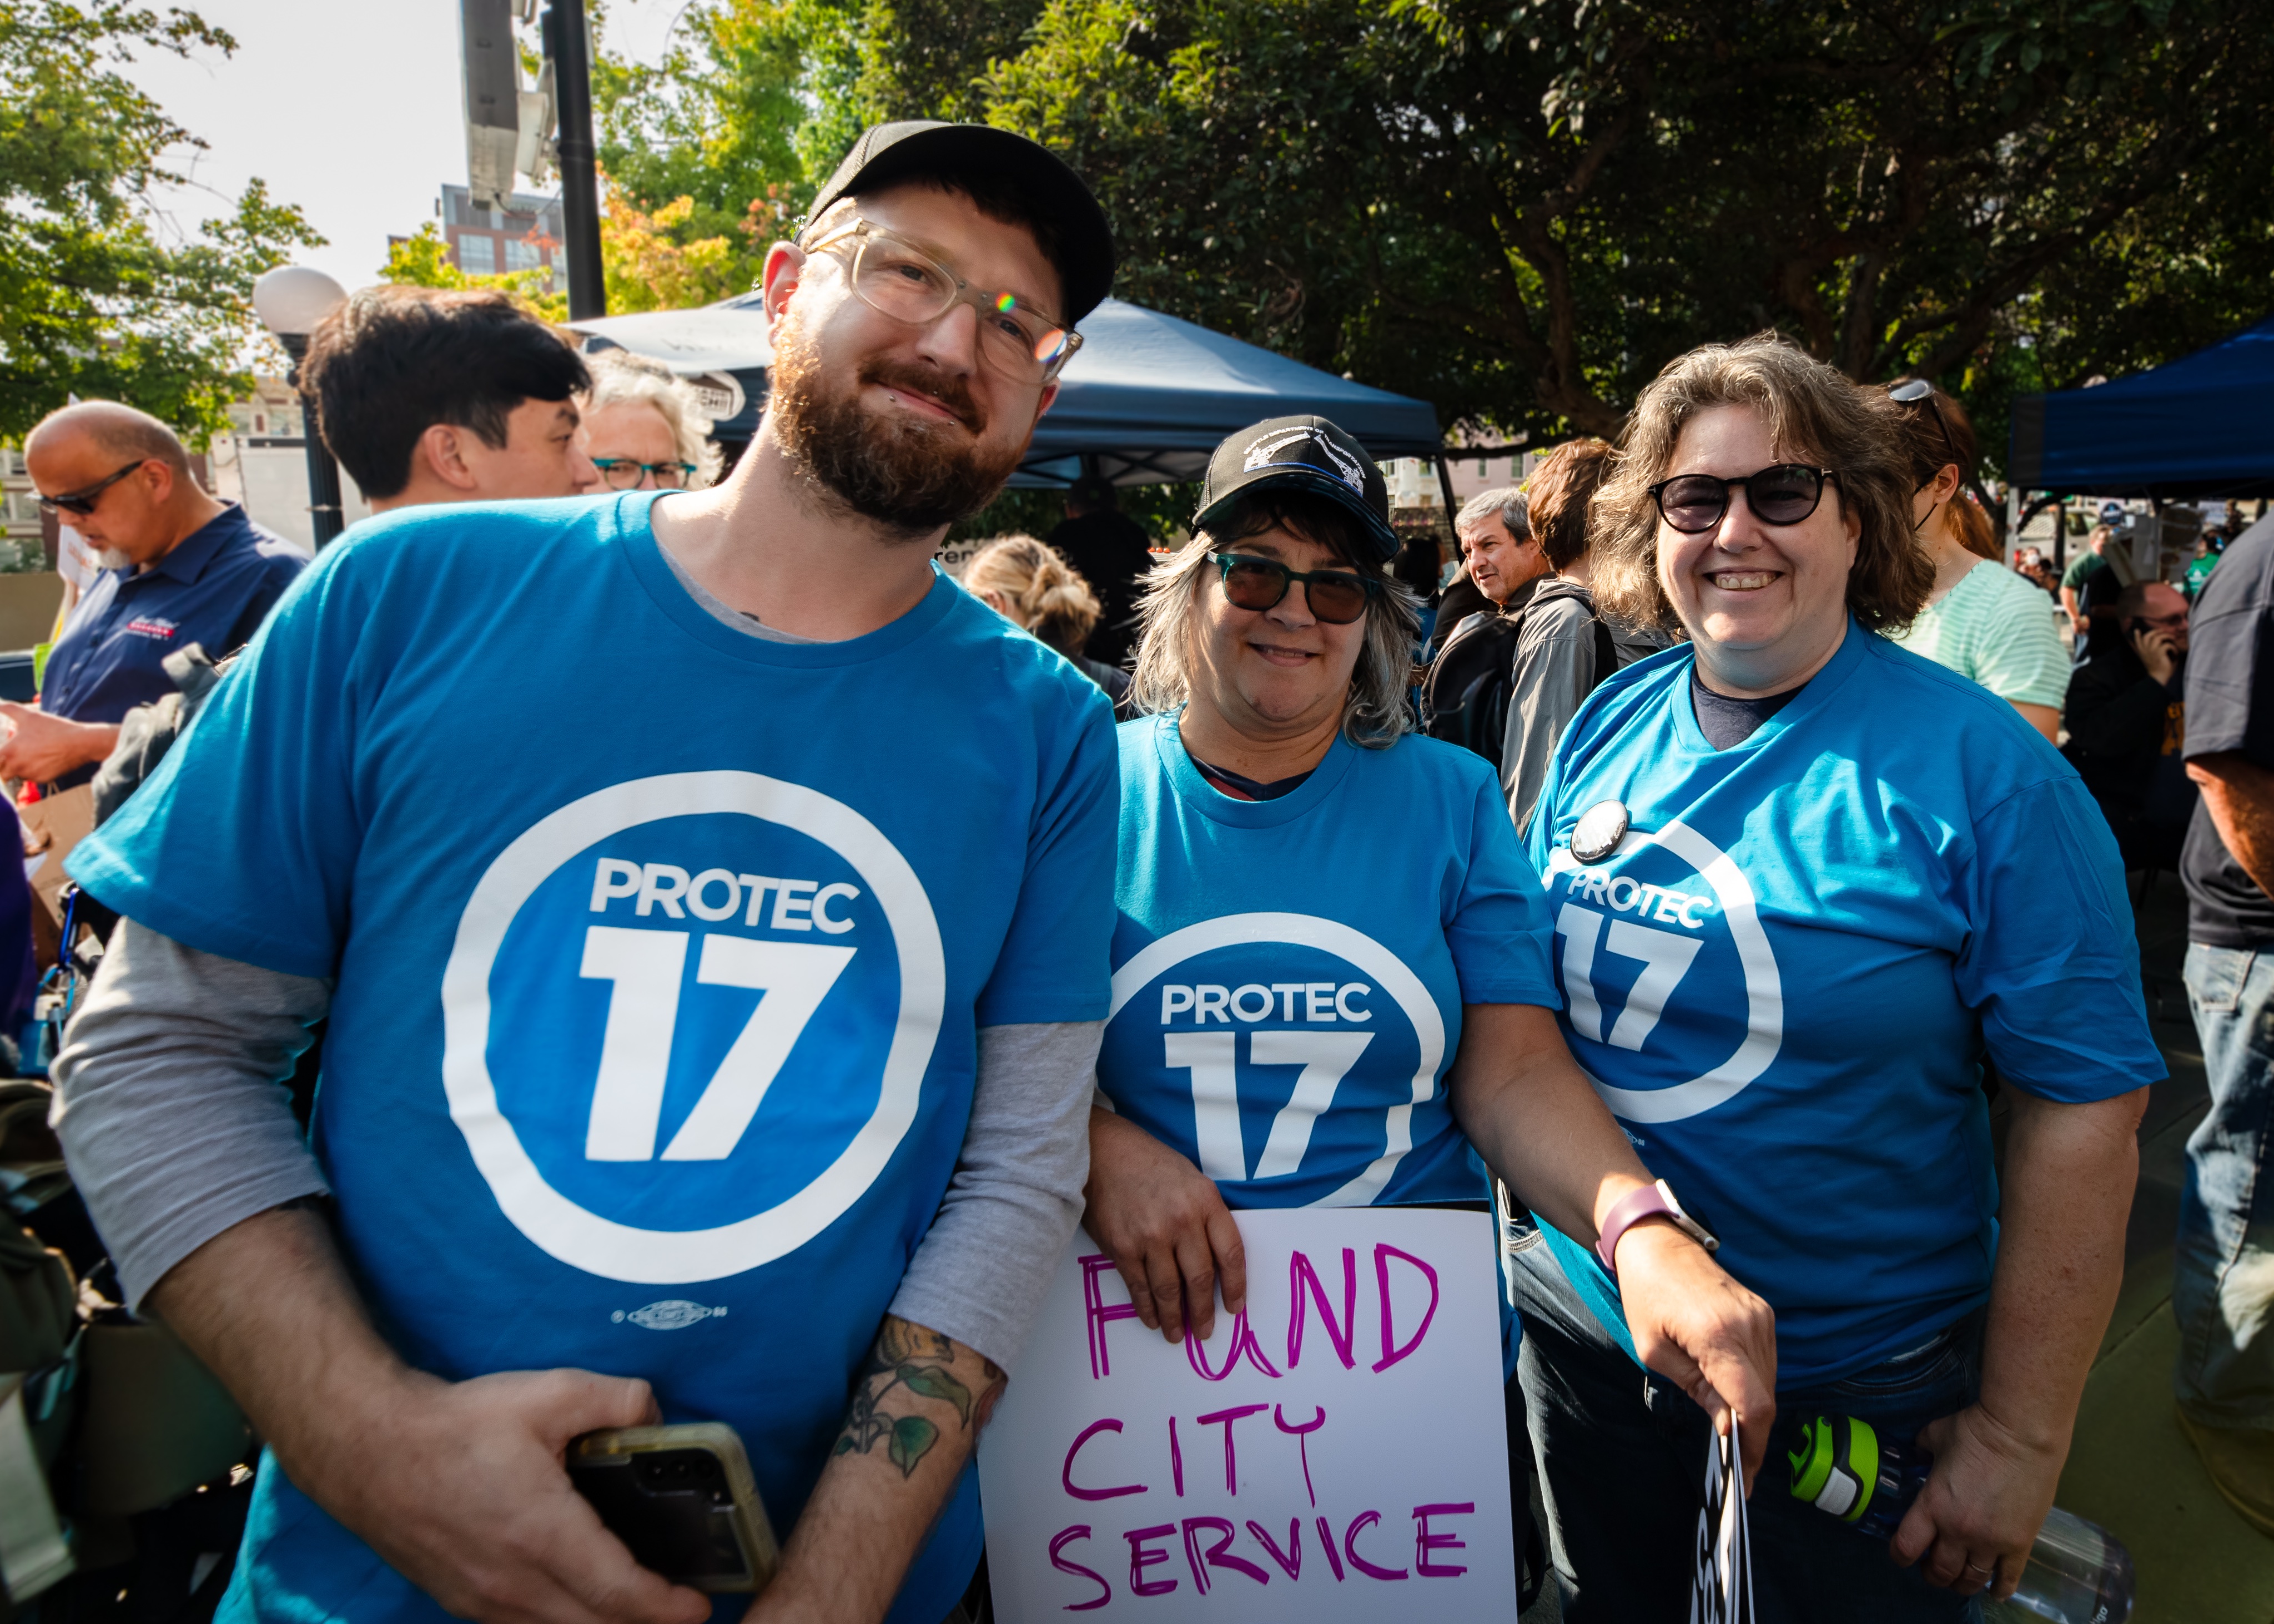 Picture of coalition members wearing PROTEC17 shirts, smiling, and holding a sign that reads, "FUND CITY SERVICE"